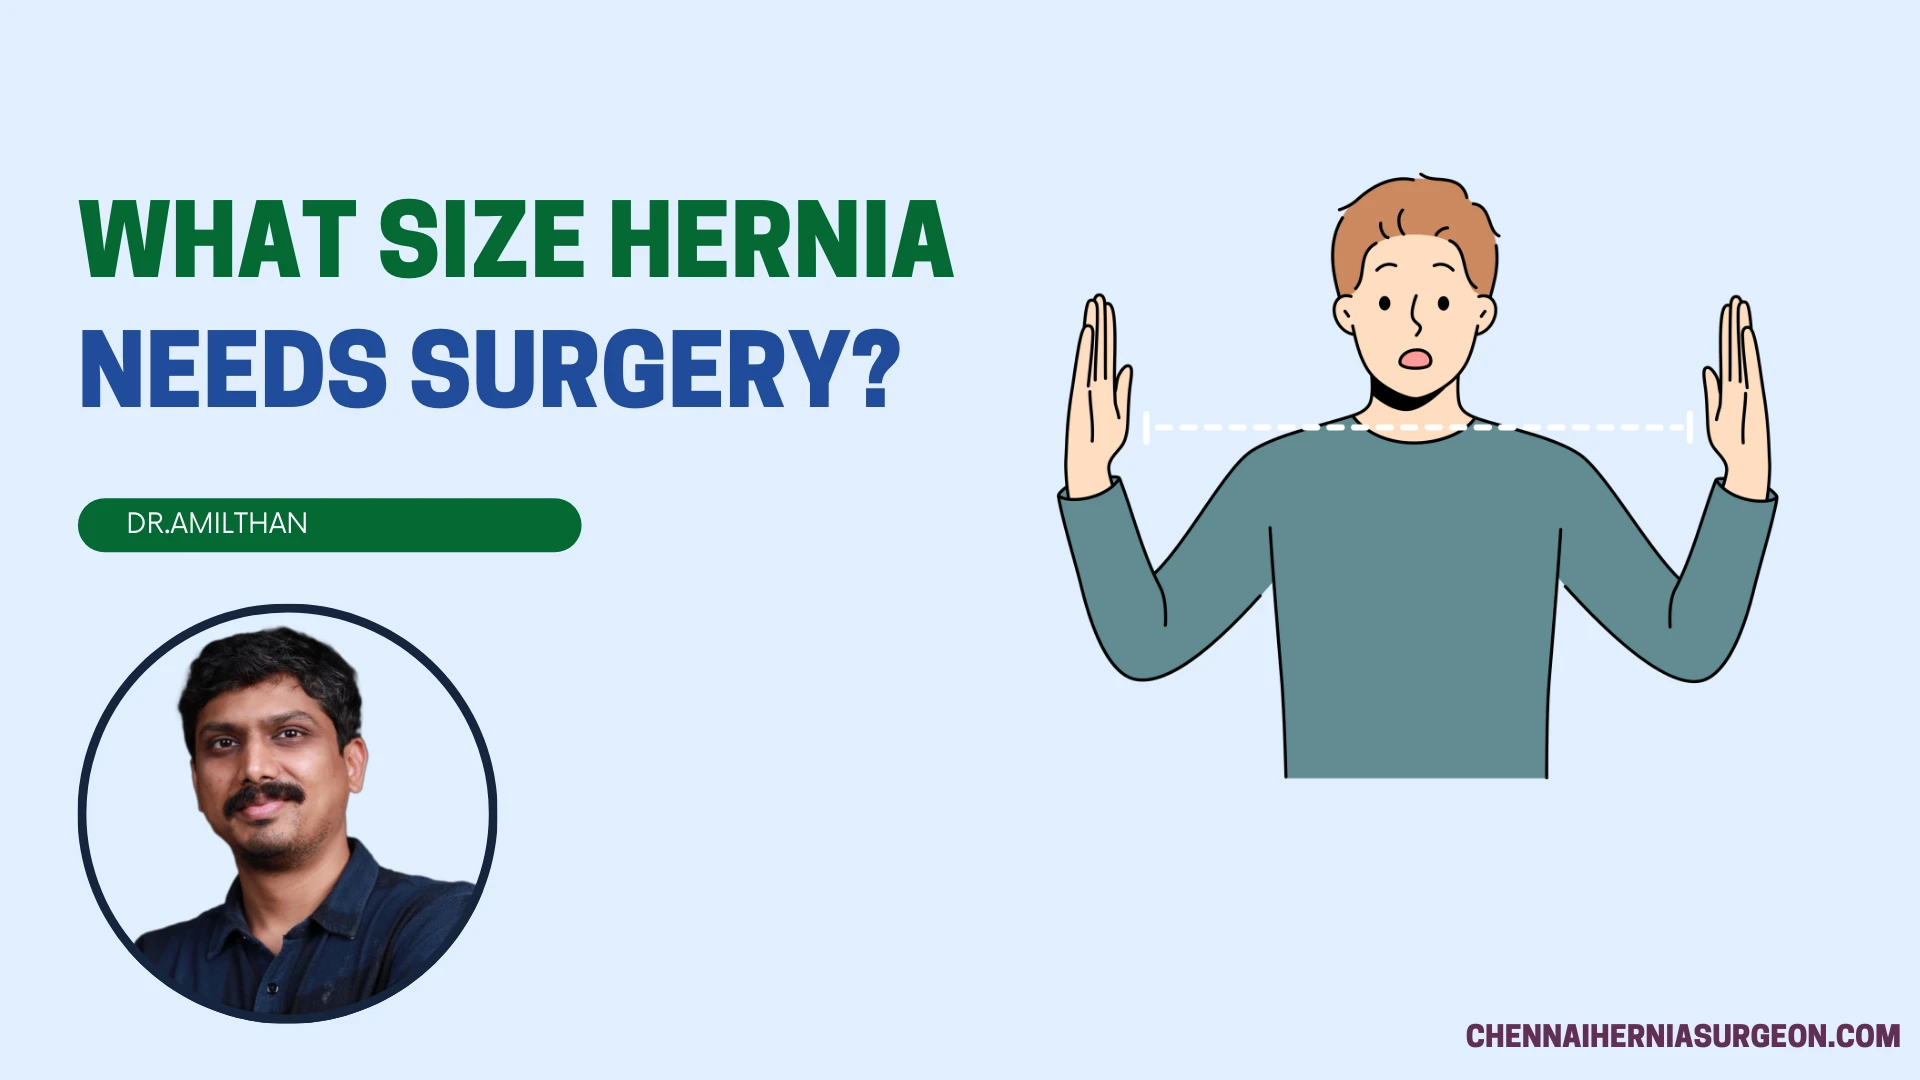 What size hernia needs surgery